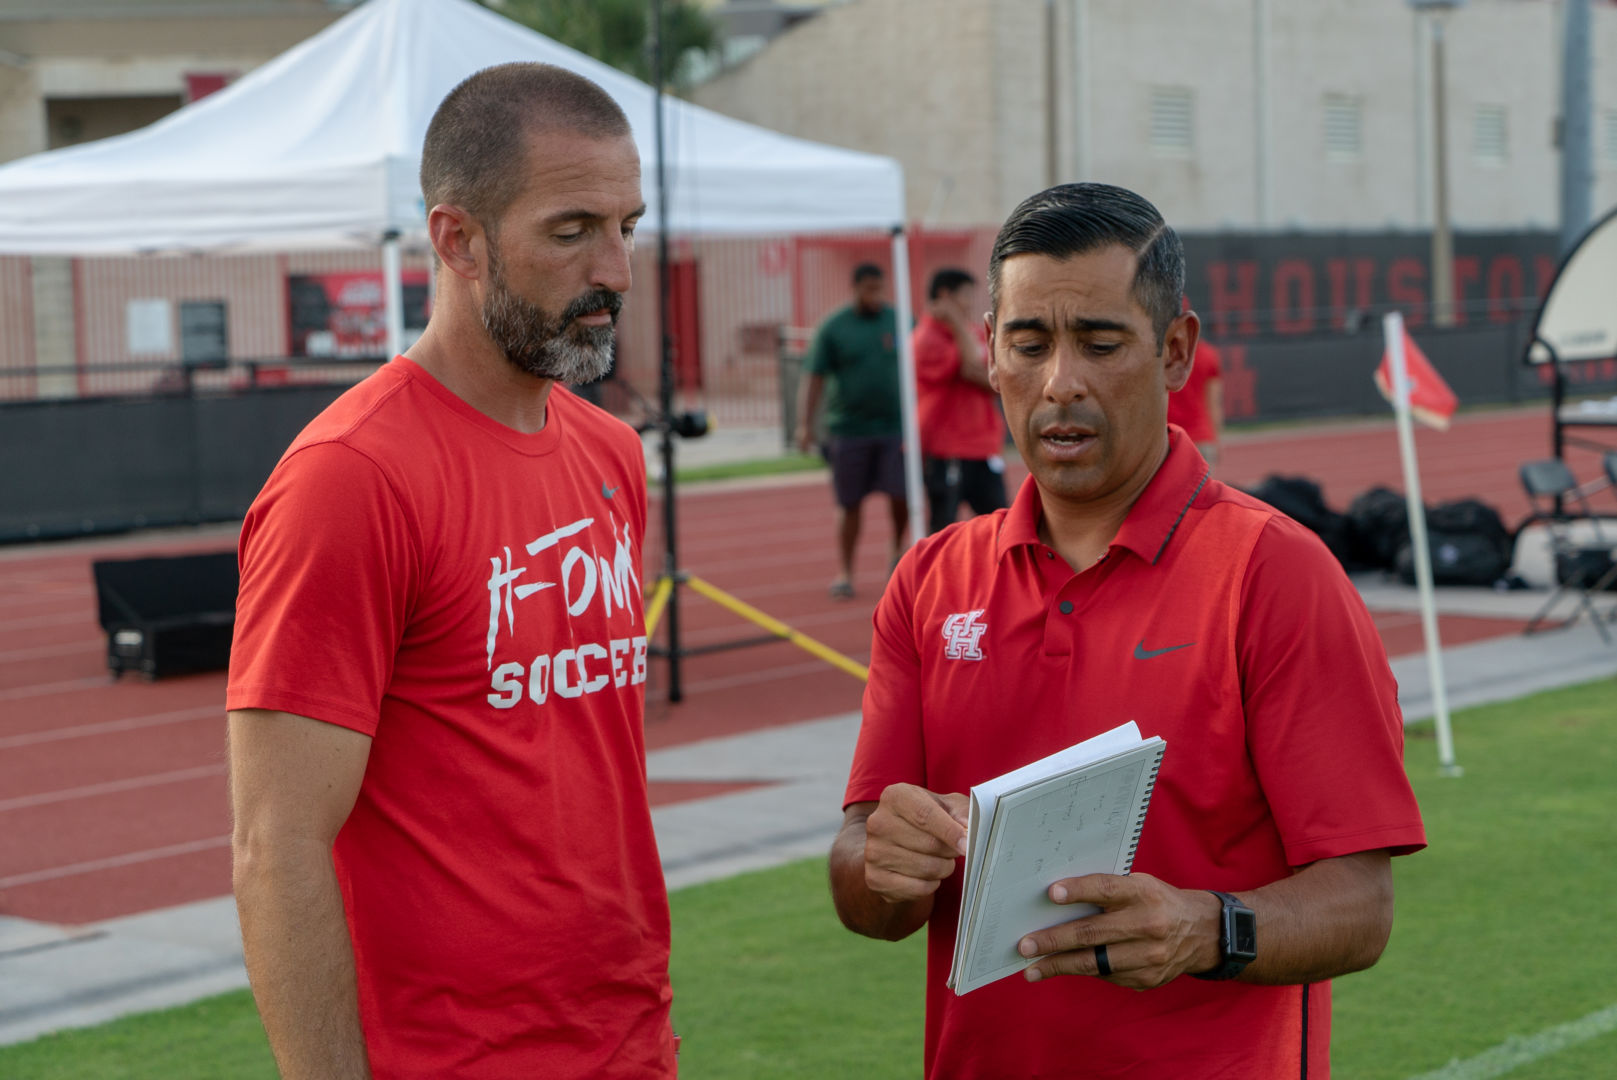 UH soccer head coach Diego Bocanegra has announced his retirement after the 2021 season, after setting a program record of 13 wins. | Courtesy of UH Athletics